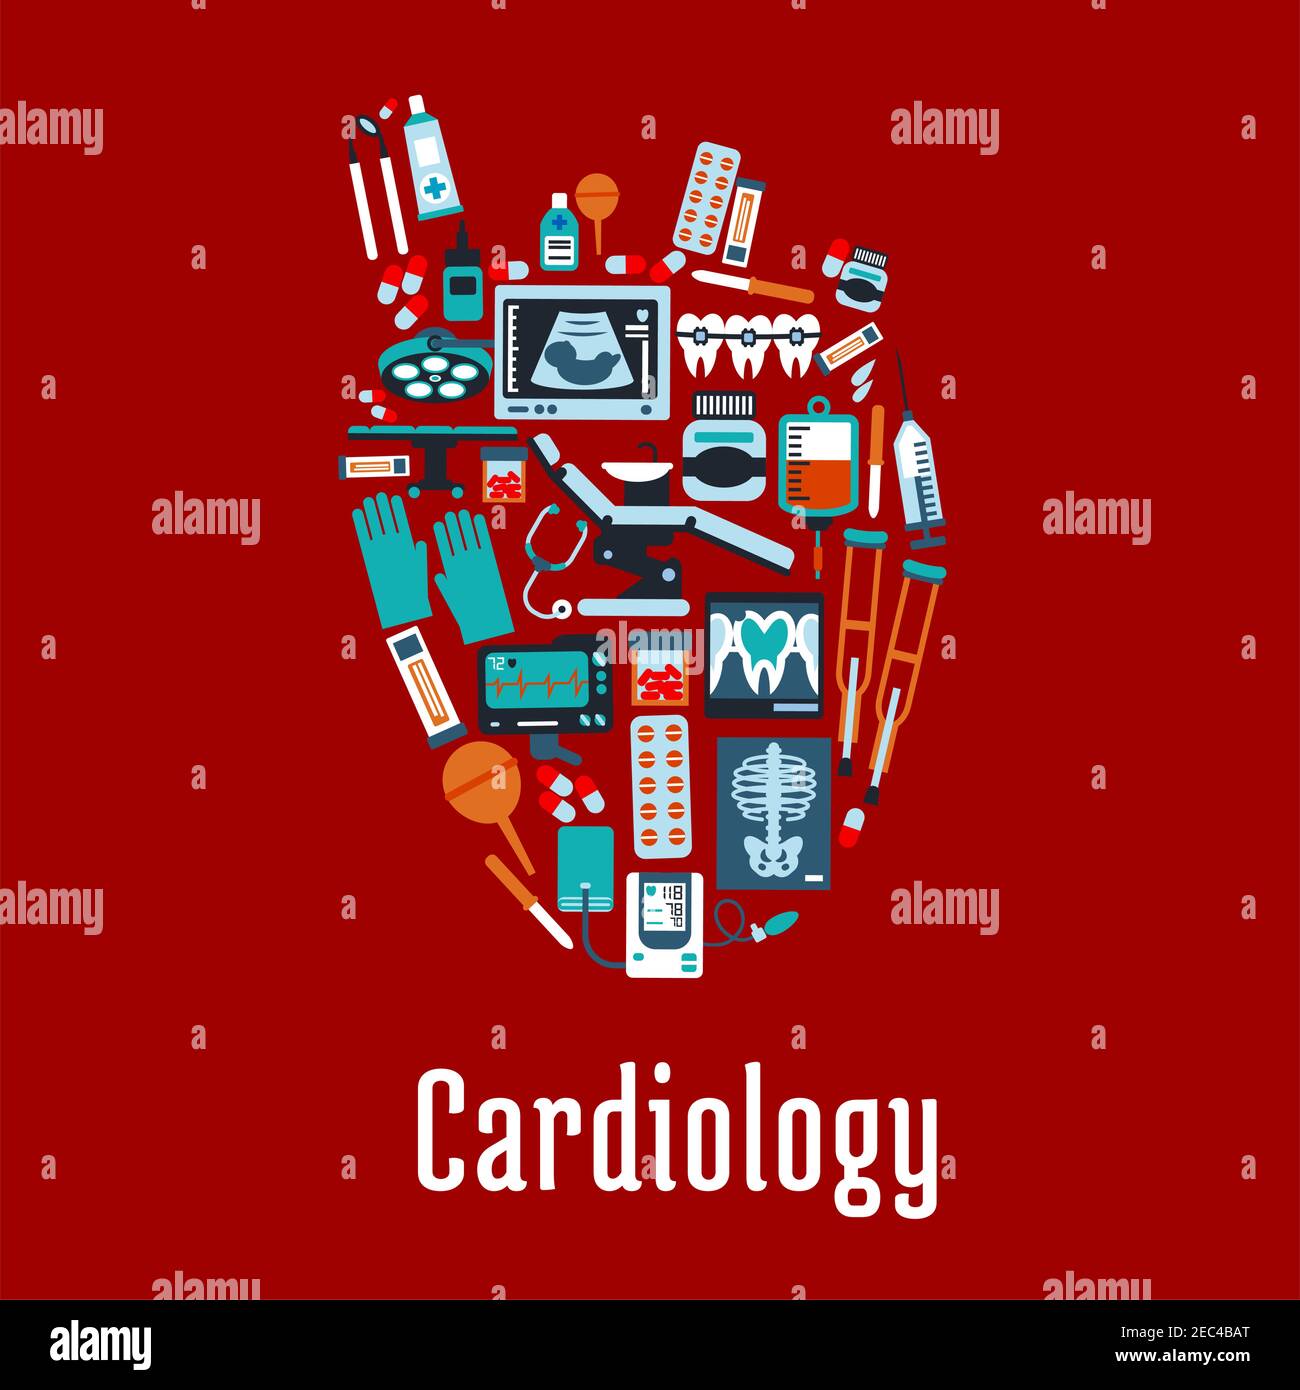 Cardiology health care symbol of heart silhouette with pills and syringes, medicine bottles and stethoscope, operation table and blood bag, ecg and bl Stock Vector